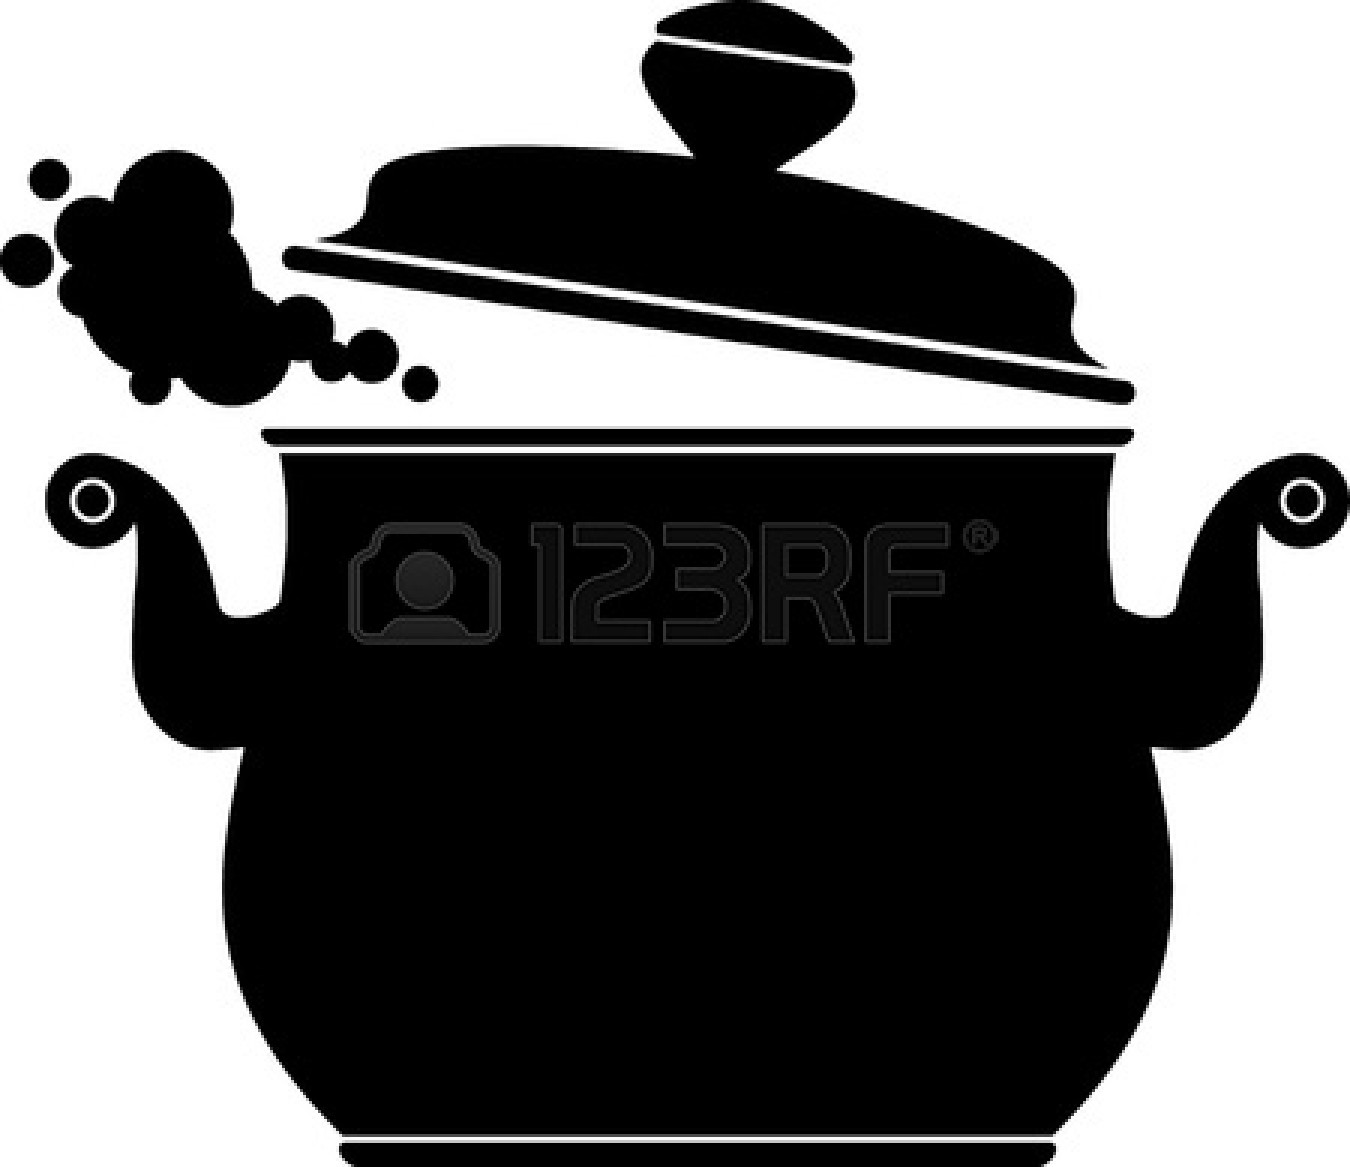 Coffee Pot Silhouette   Clipart Panda   Free Clipart Images